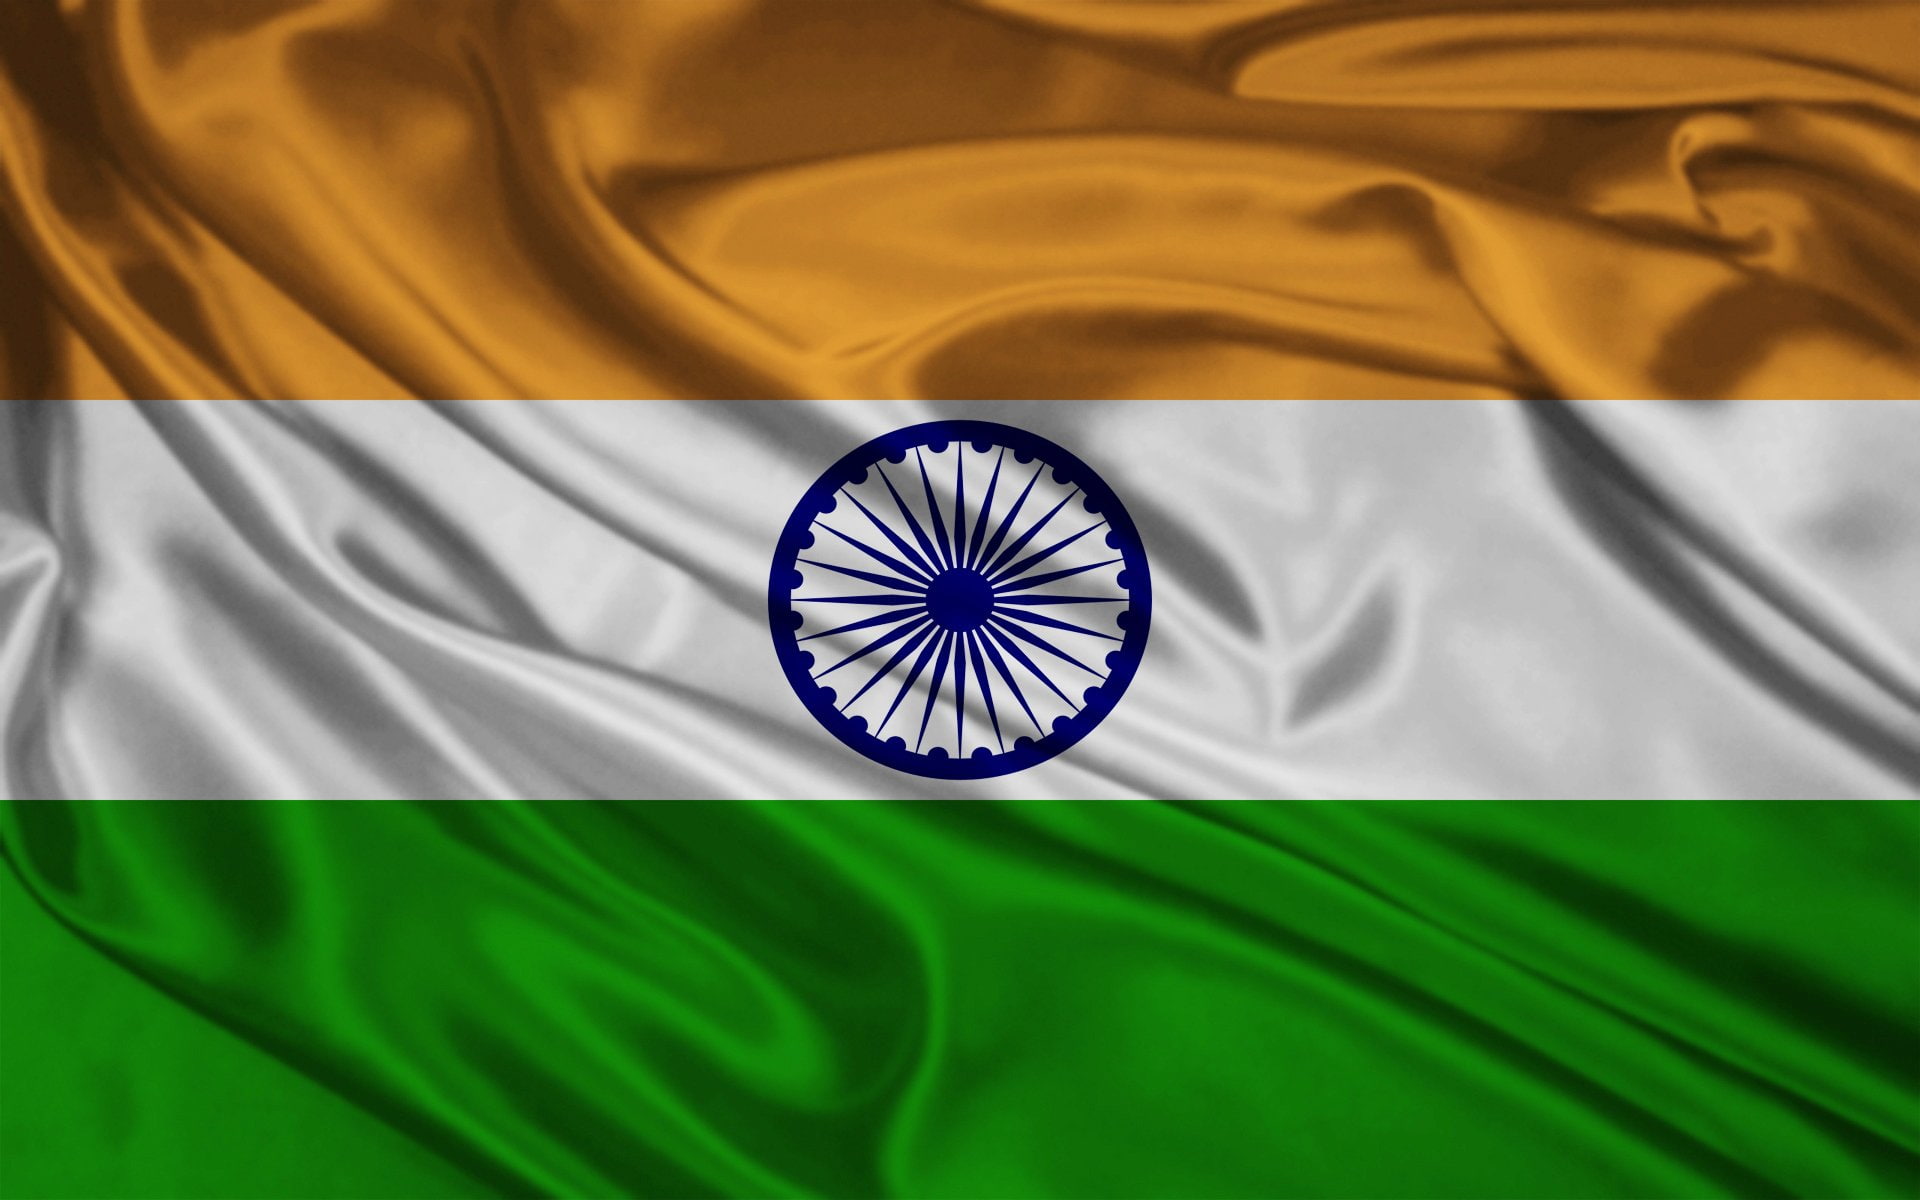 flag, flags, india, indian